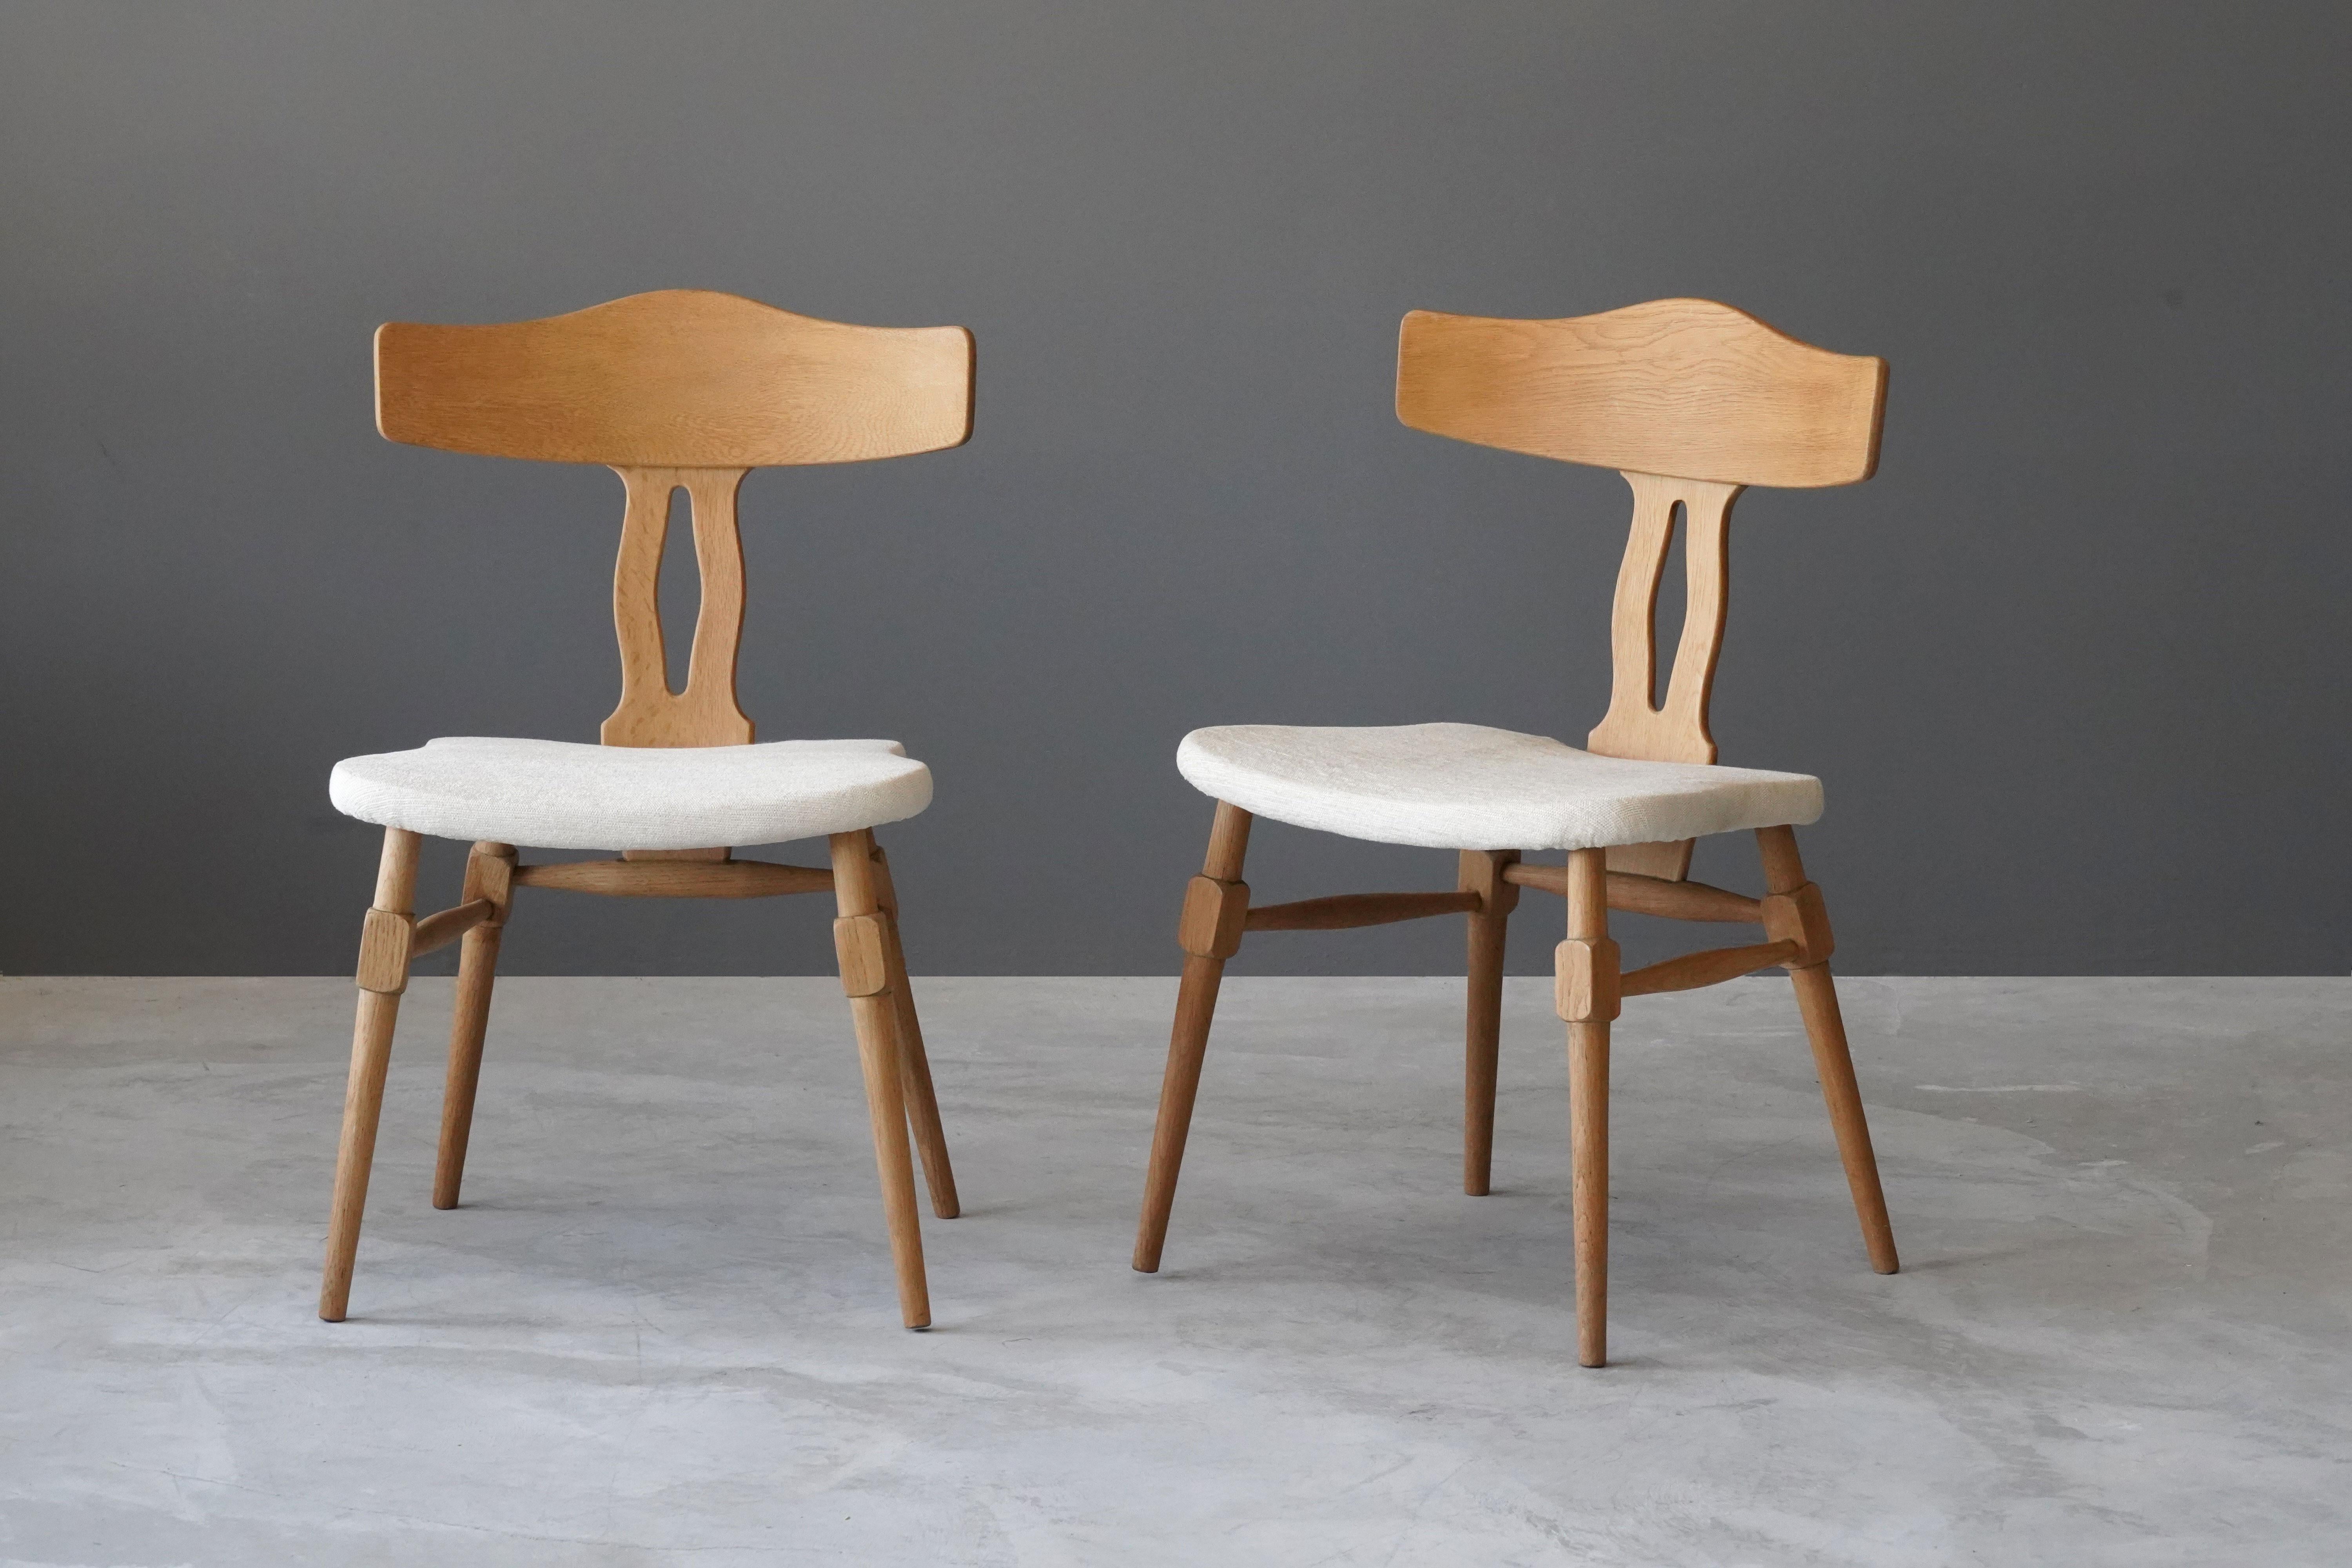 A pair of side chairs by an unknown Danish designer. Produced in Denmark, 1960s. 

The carved and joined oak frame is paired with an organic overstuffed seat. Newly reupholstered.

Other designers of the period include Kaare Klint, Philip